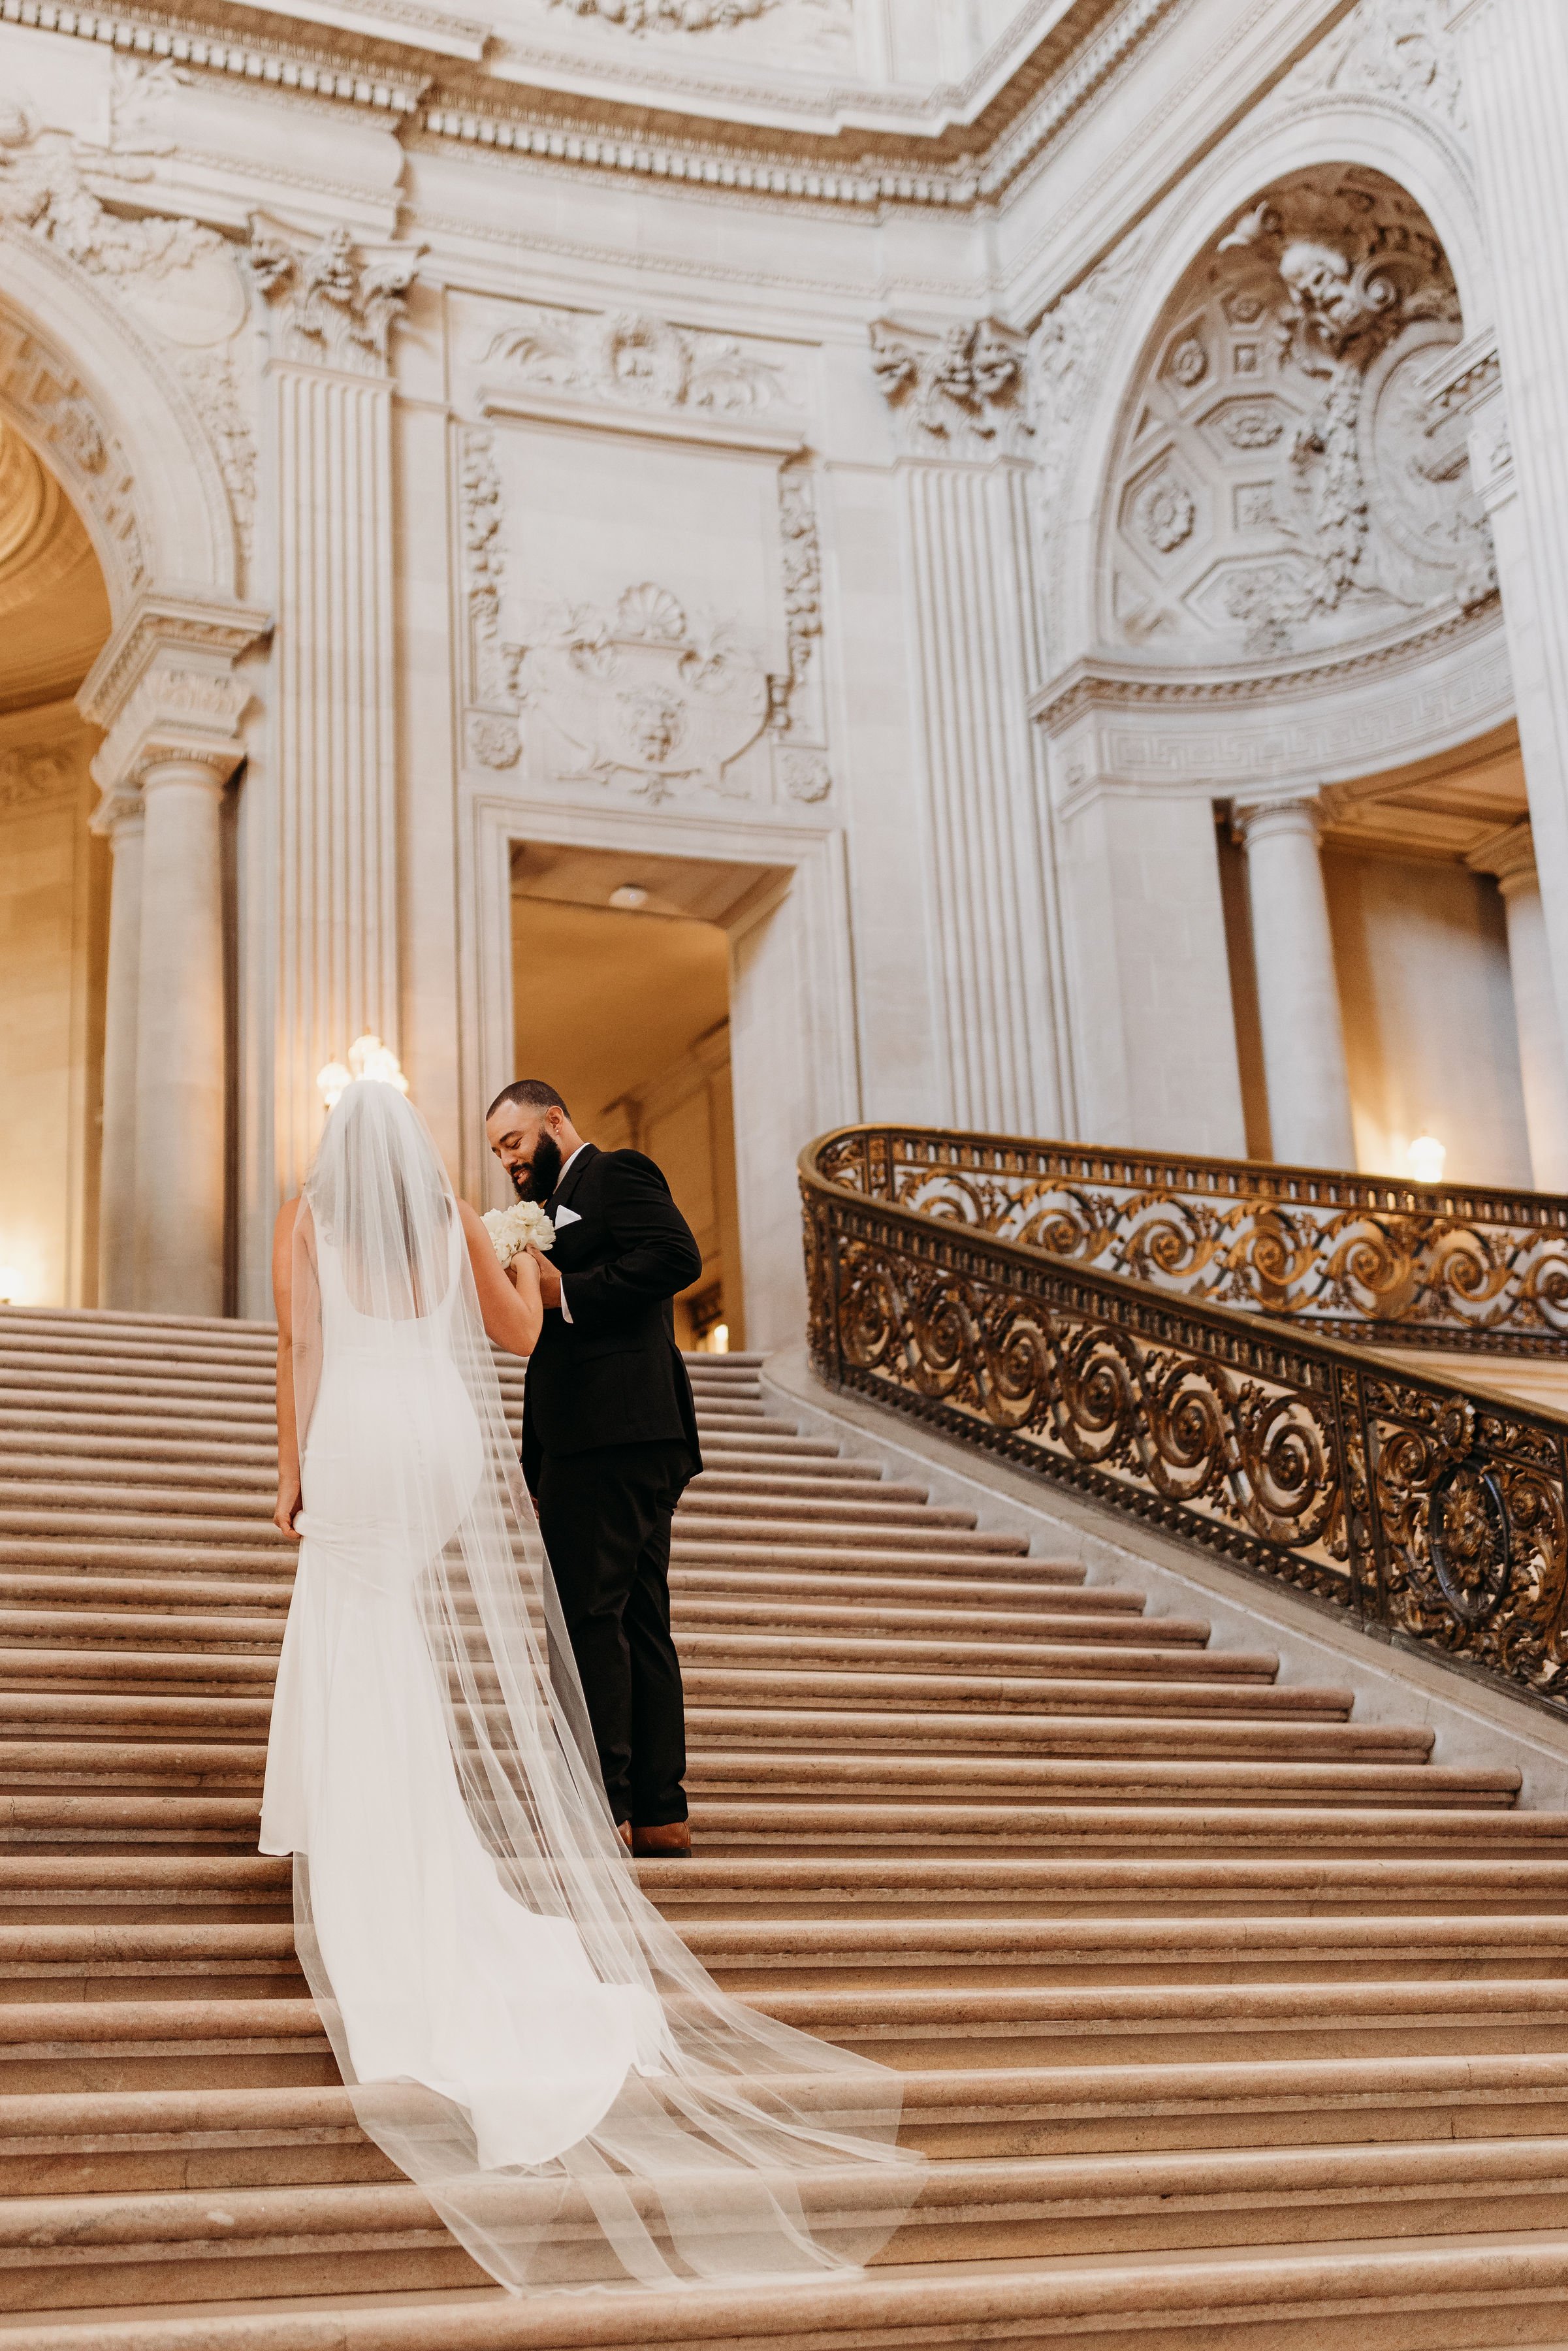 A Chic Bridal Jumpsuit for a City Hall Wedding in Black, White, and Gold -  Hey Wedding Lady